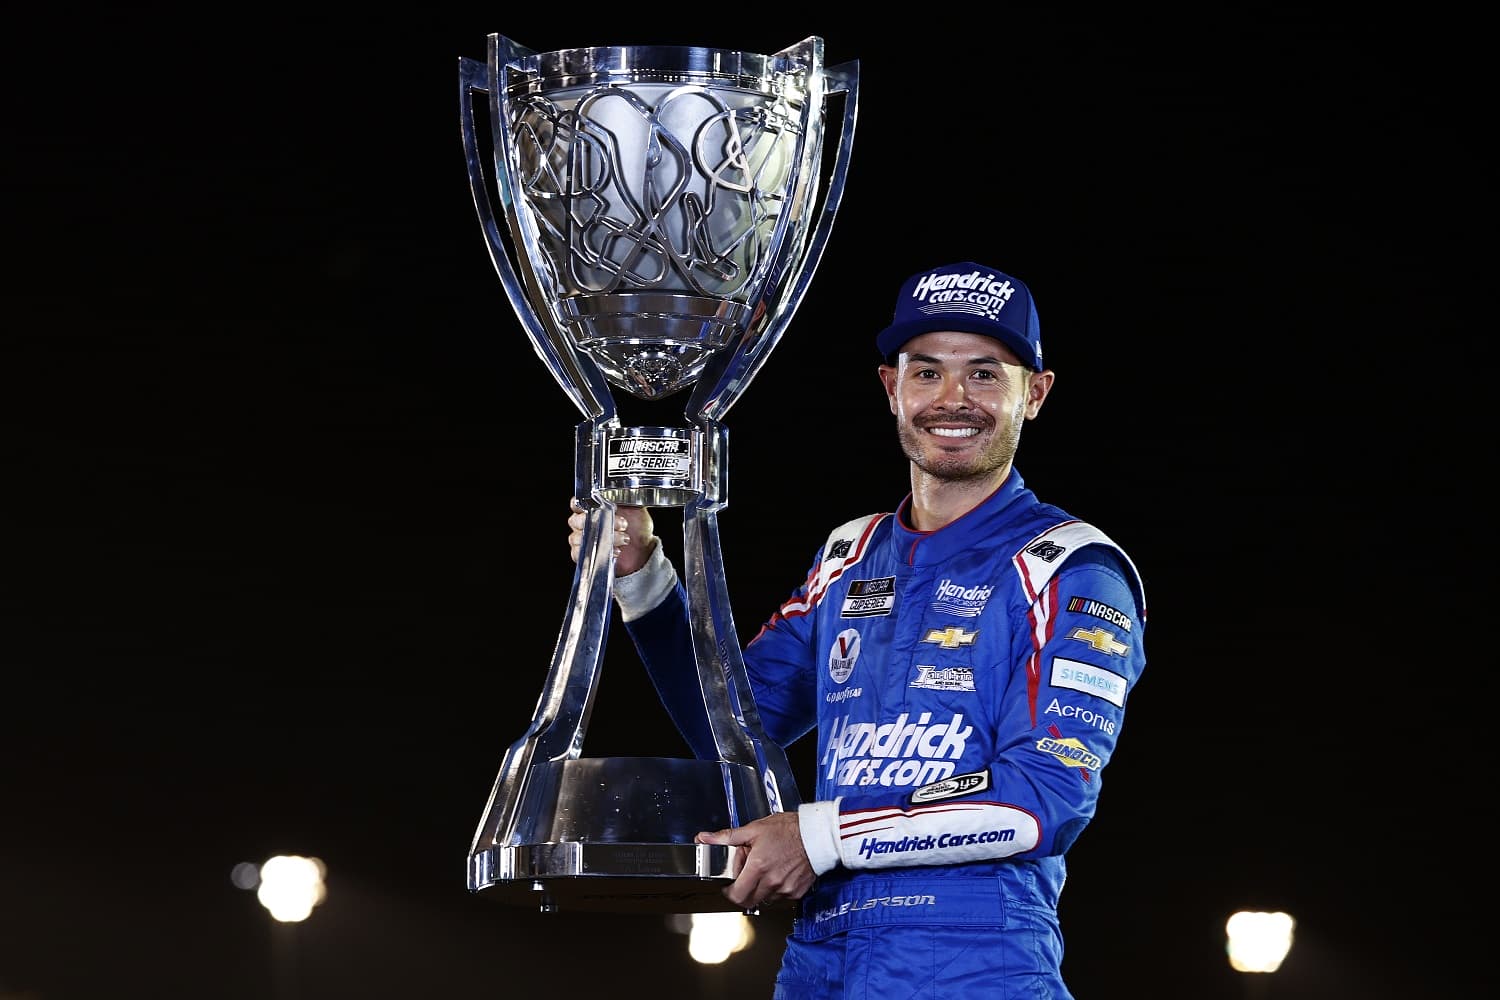 Kyle Larson poses for photos after winning the NASCAR Cup Series Championship at Phoenix Raceway on Nov. 7, 2021.